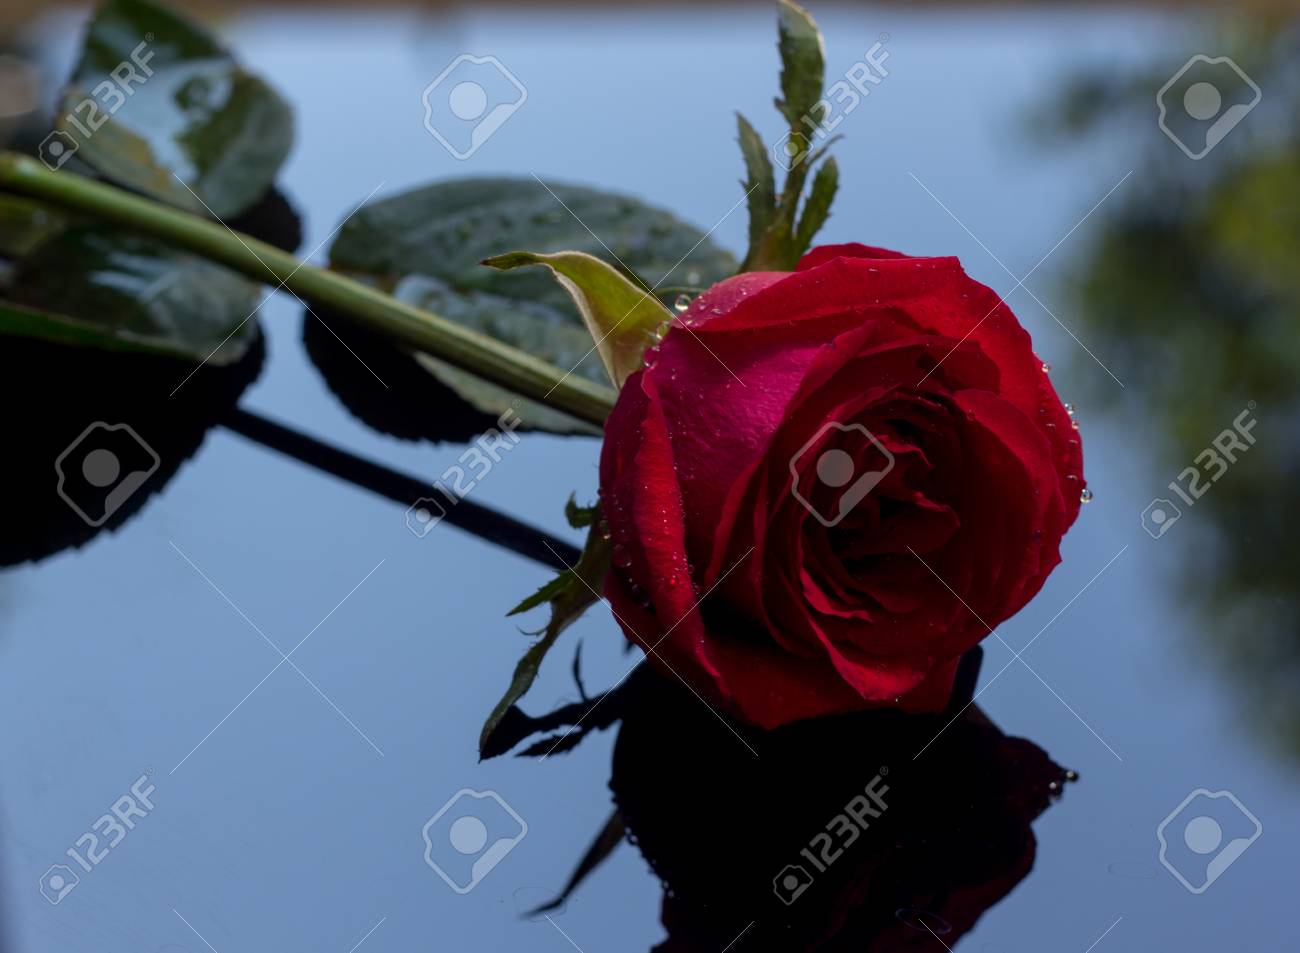 A red rose is placed on a black background with reflection.